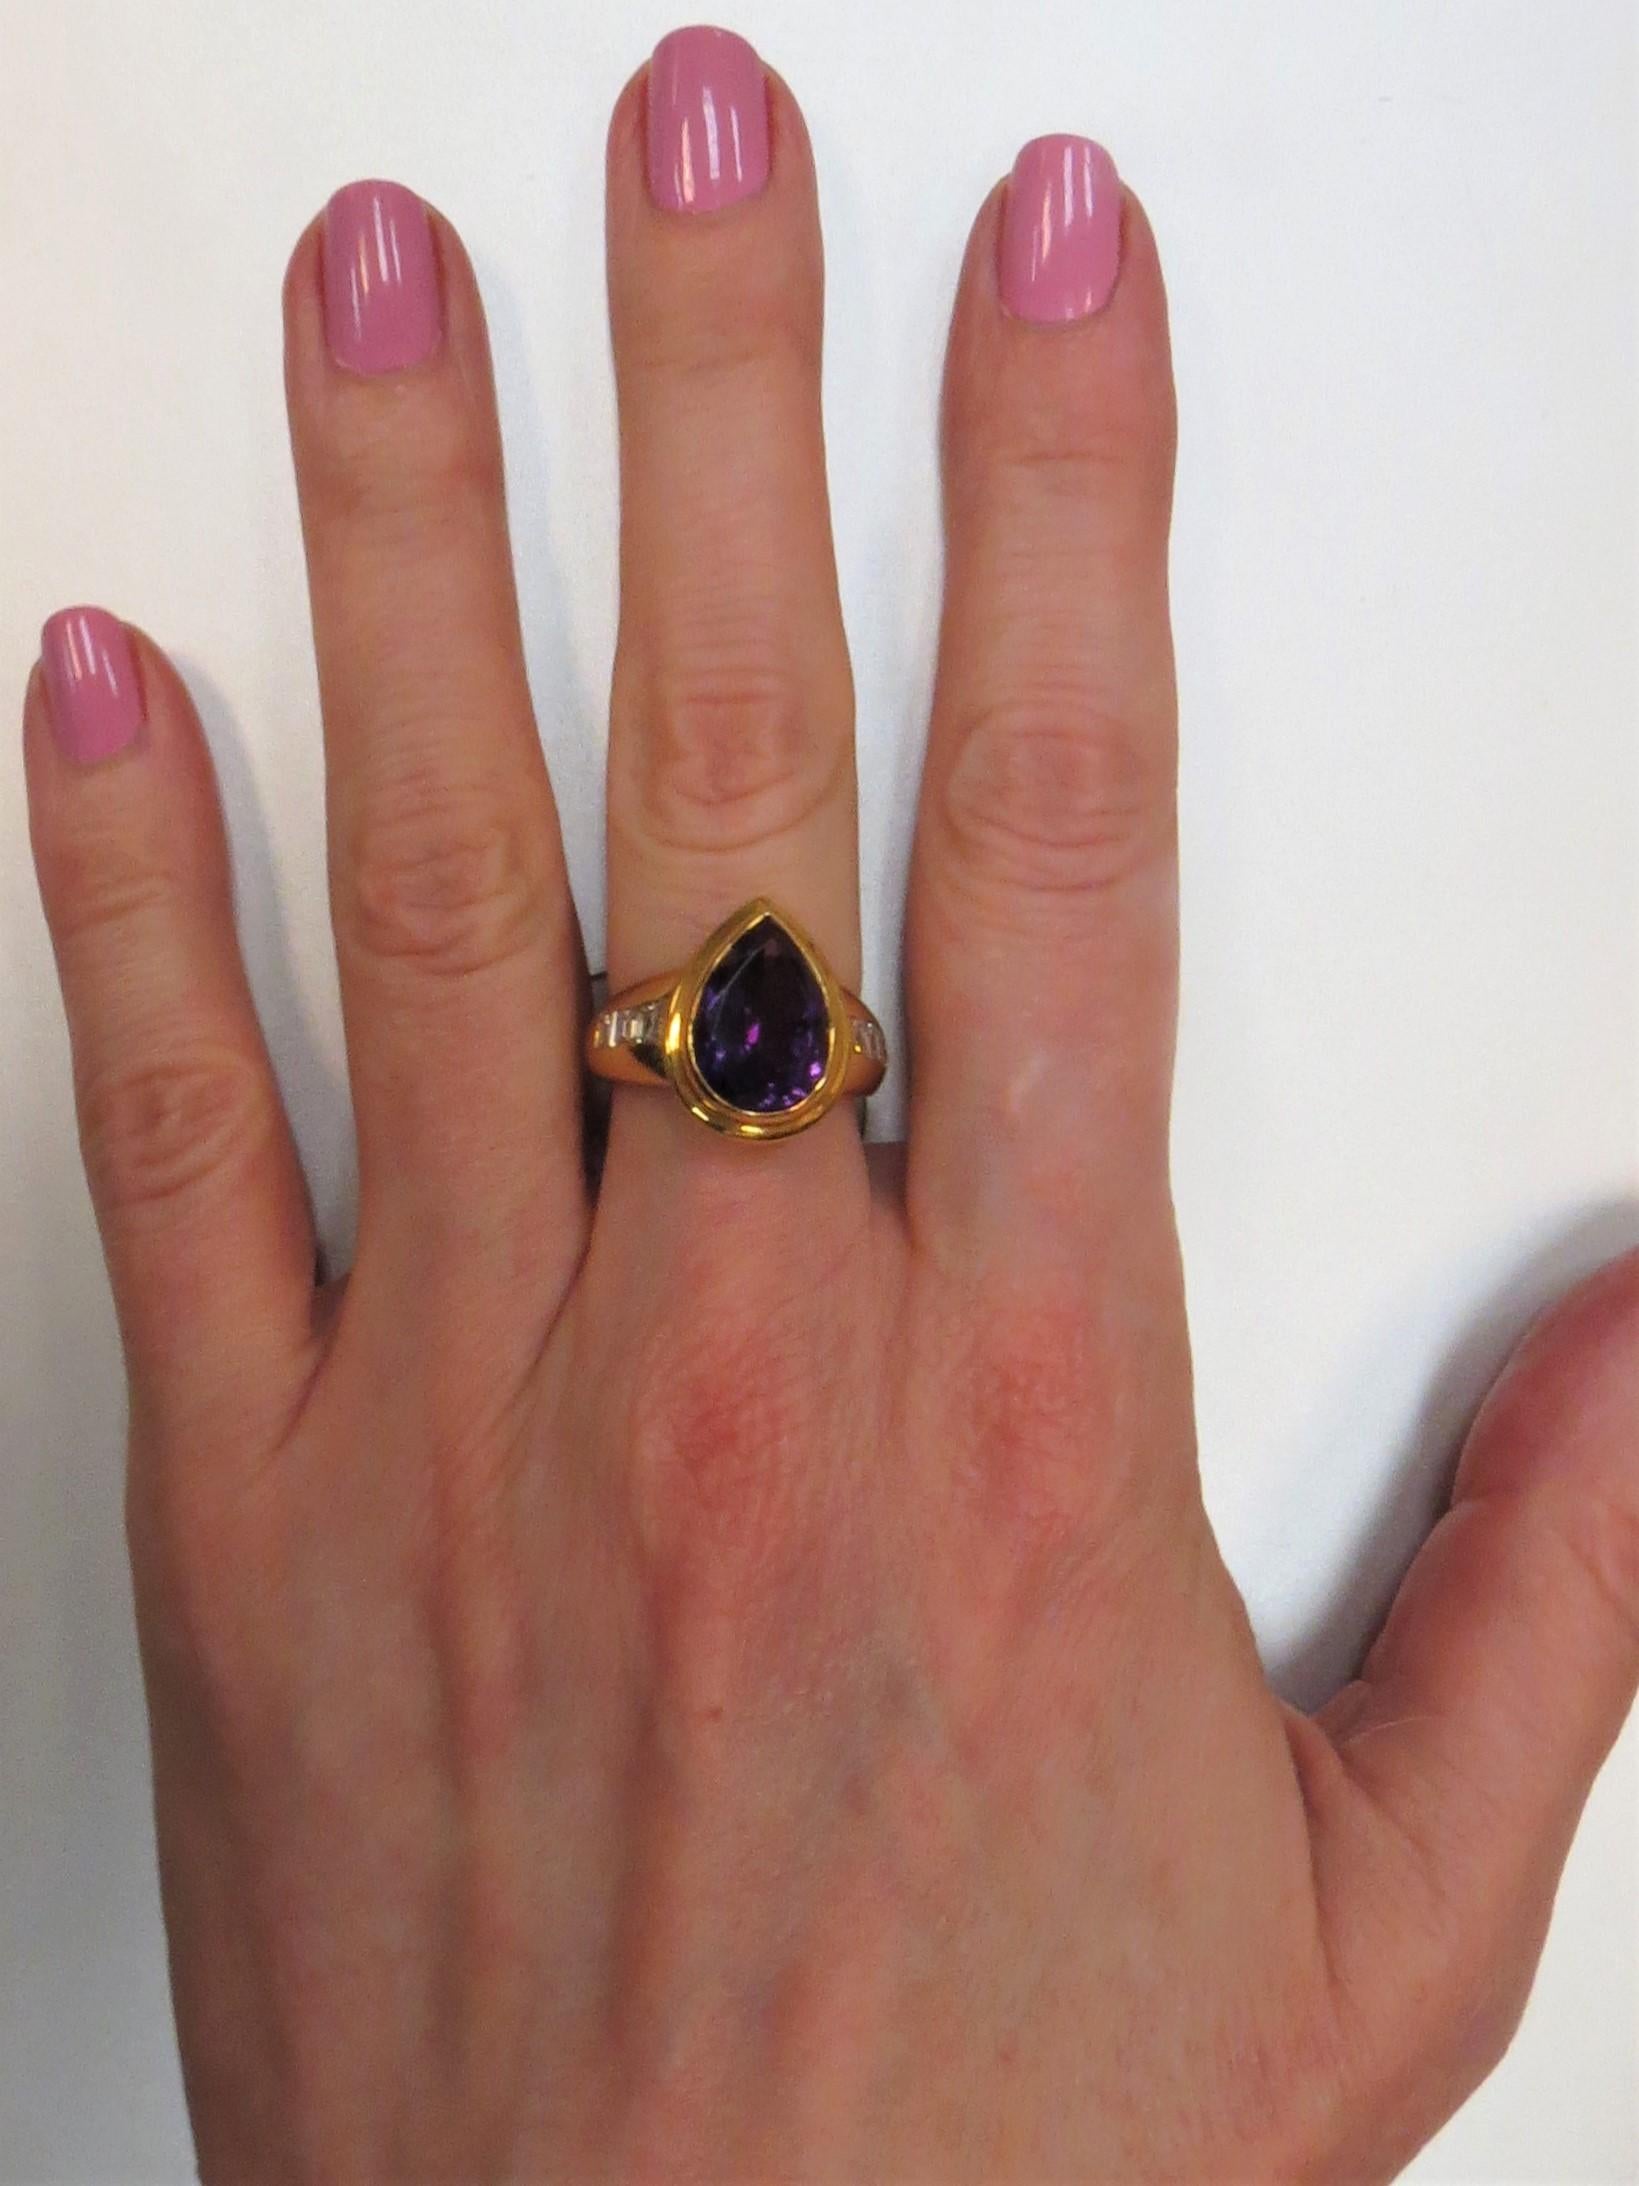 Susan Berman, 18K yellow gold ring, bezel set in center with one Pear shape Amethyst weighing 4.49ct and 6 Square cut diamonds weighing .72cts, G color, VS clarity. 
Finger size 6, may be sized. 
Retail $5500